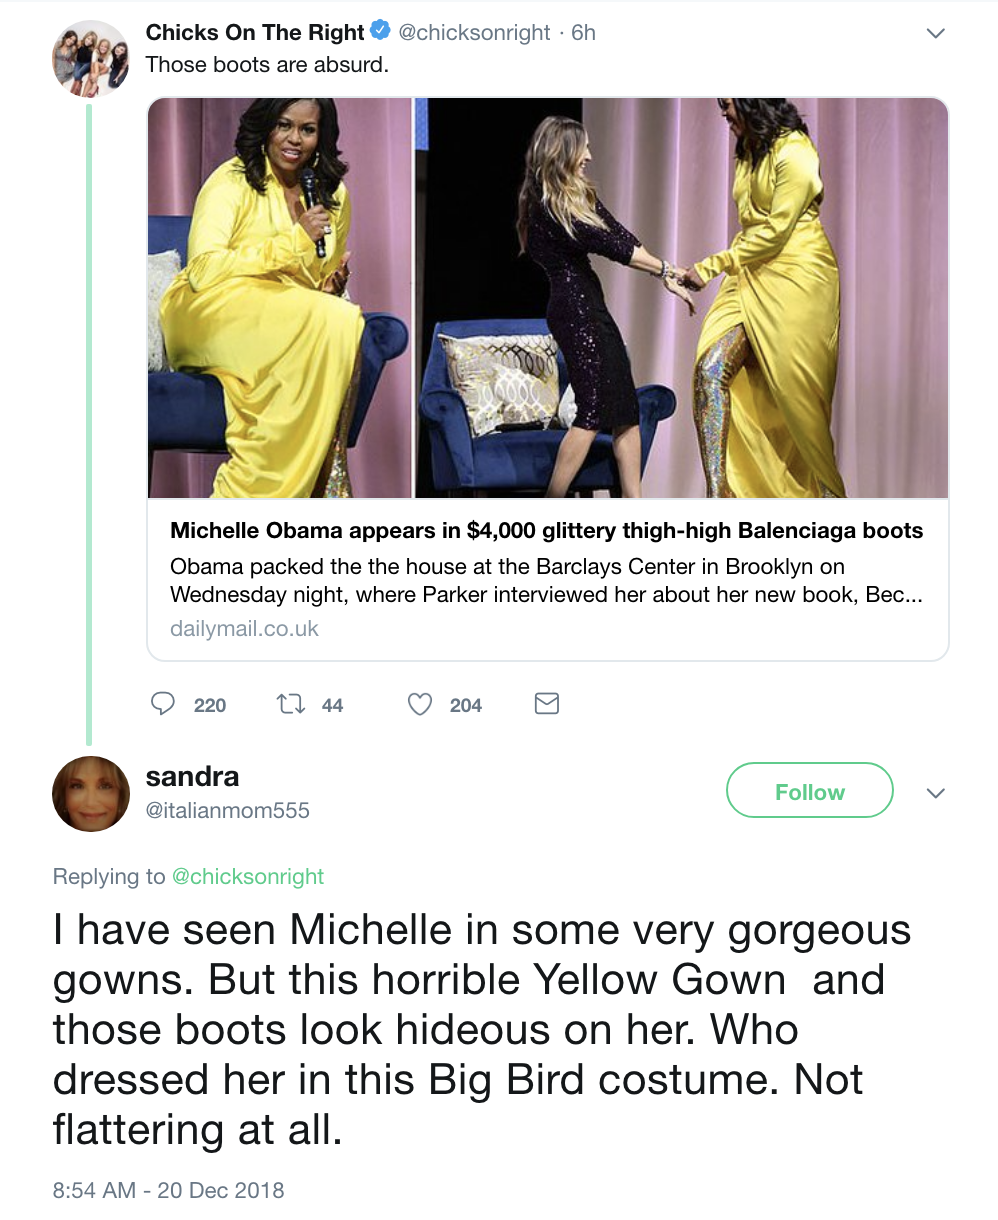 Screen-Shot-2018-12-20-at-11.48.43-AM Michelle Obama's Latest Fashion Statement Has Republicans Going Full Racist (IMAGES) Celebrities Feminism Politics Top Stories 